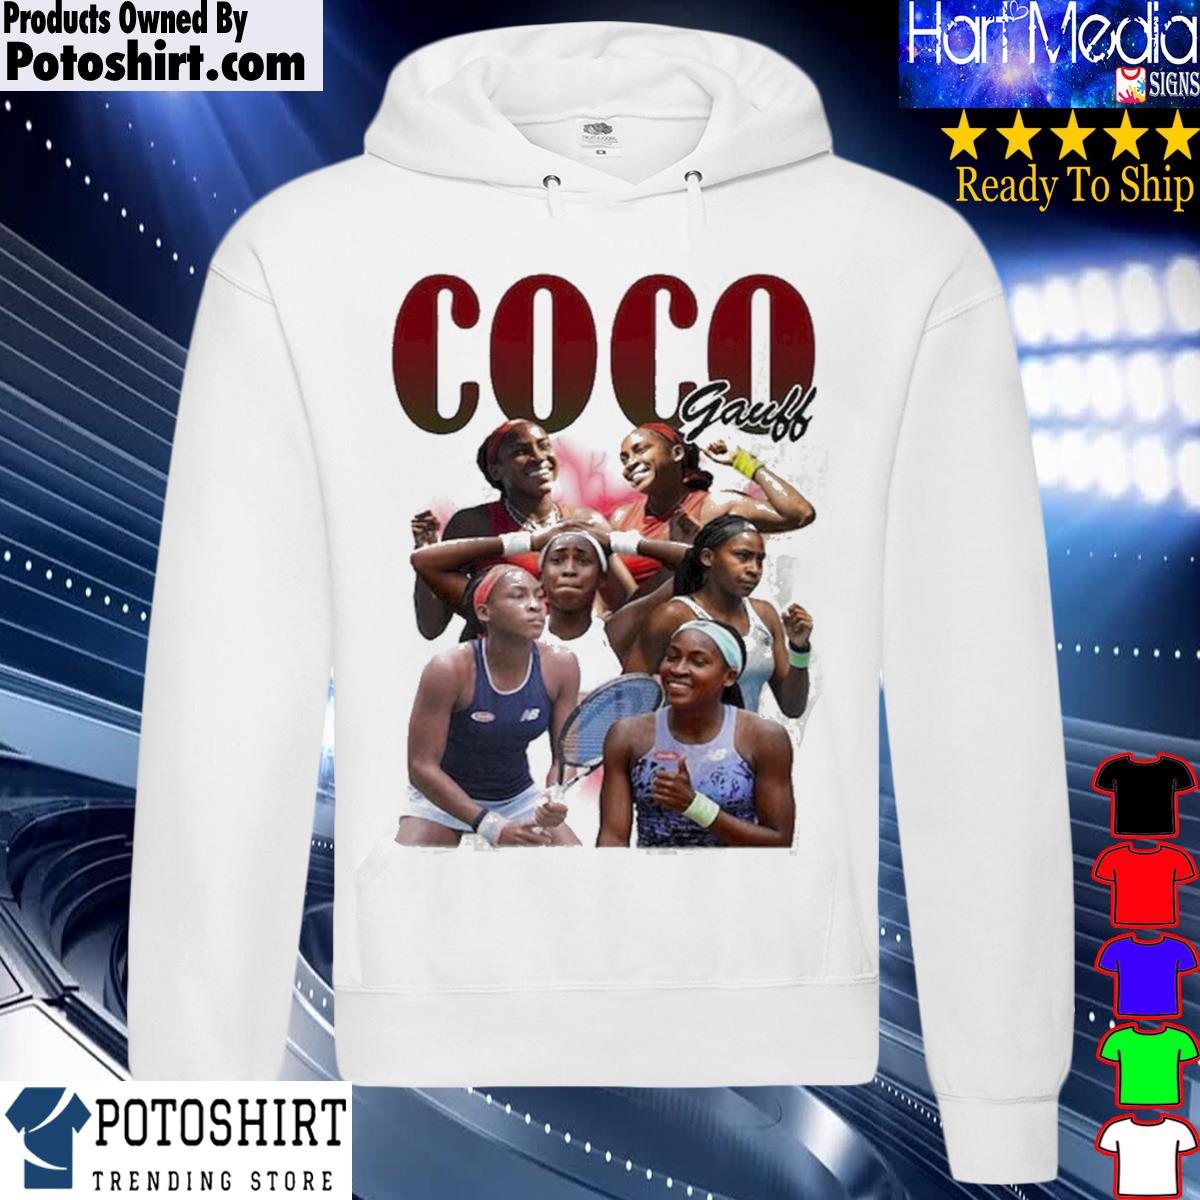 Official call Me Coco Shirt, Call Me Coco Champion T-shirt, Coco Gauff Vintage, Wimbledon, Us Open 2023 Champion Tee Tennis Gift hoodie